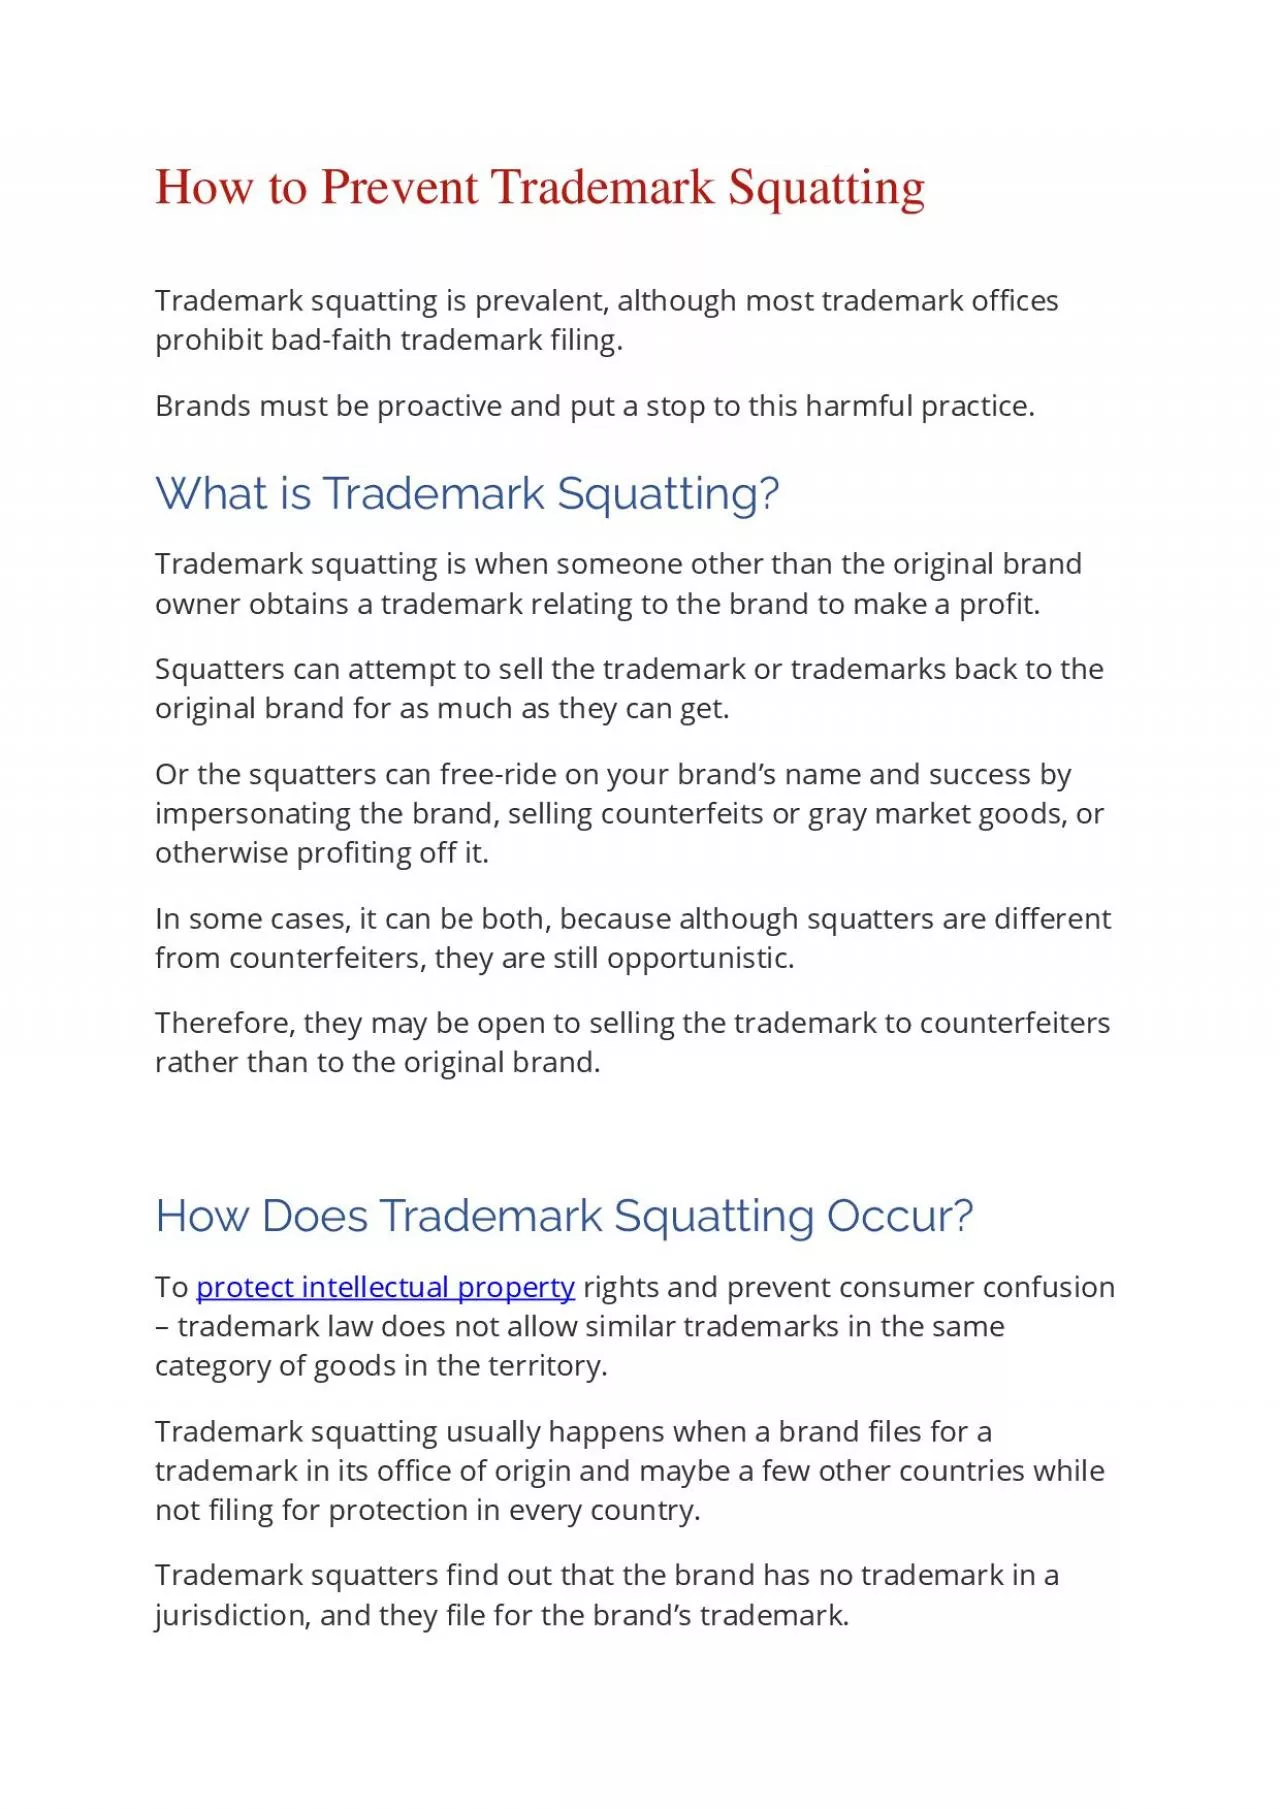 How to Prevent Trademark Squatting